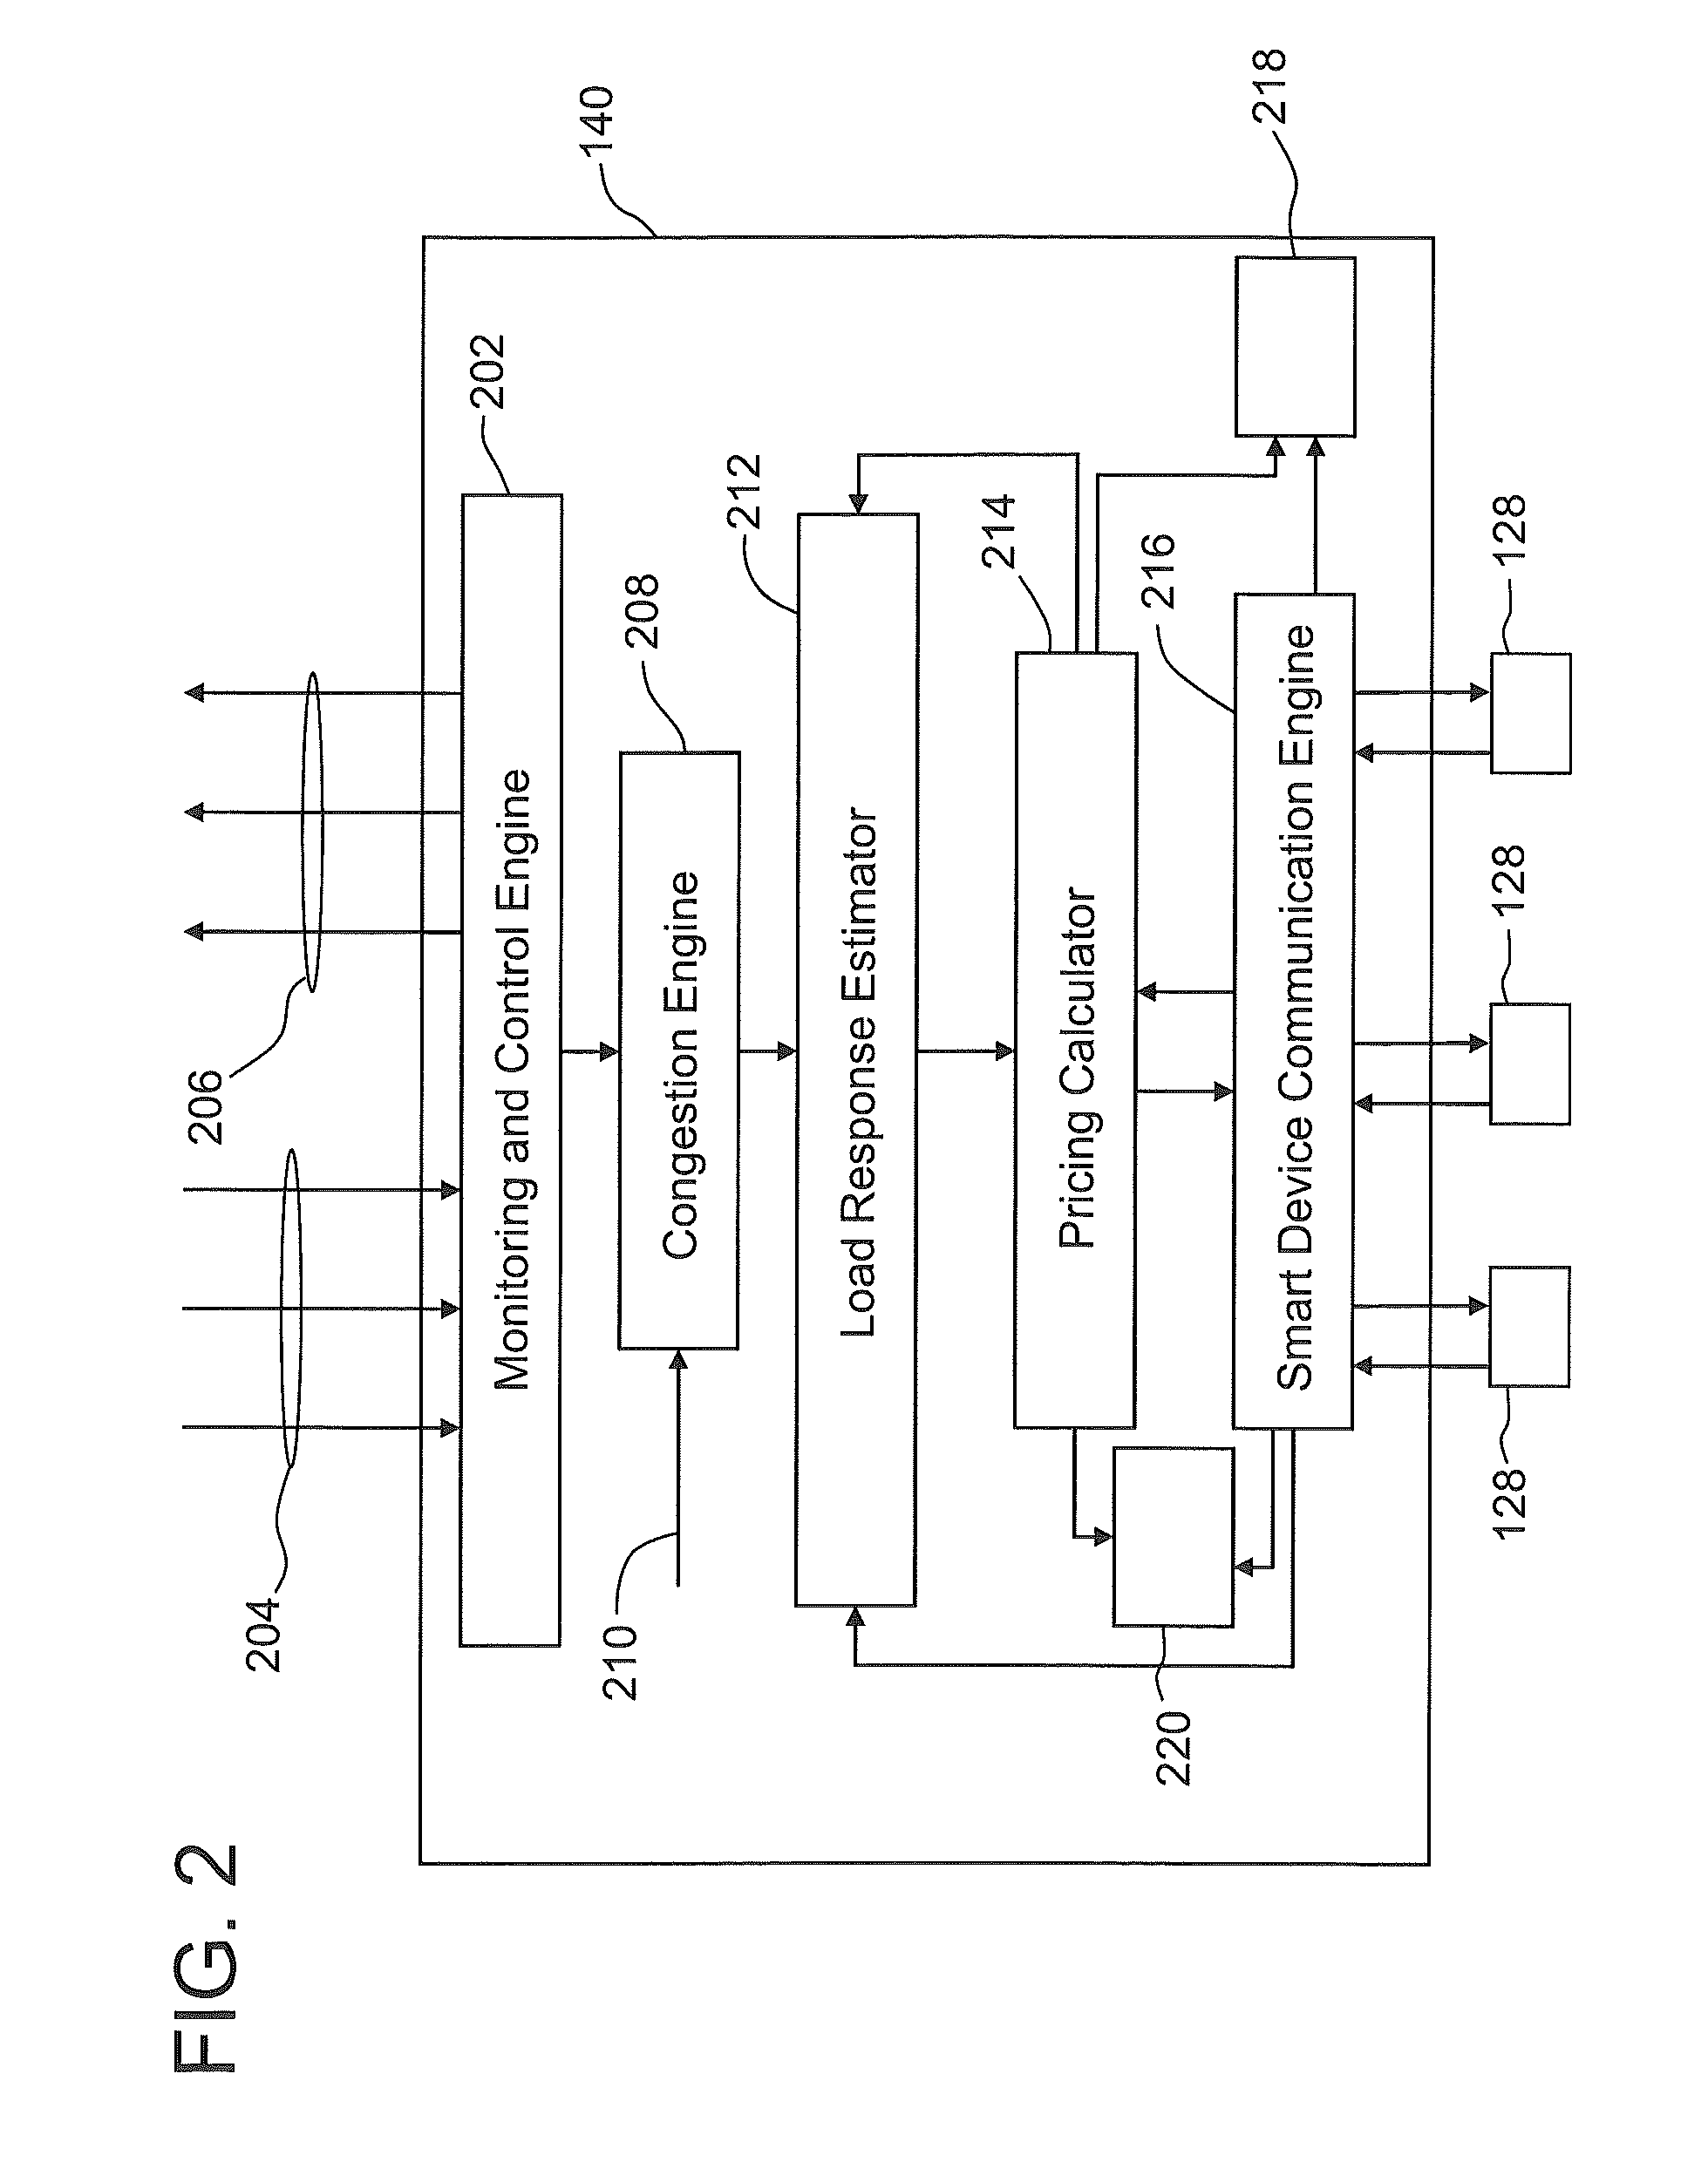 System and method for implementing congestion pricing in a power distribution network